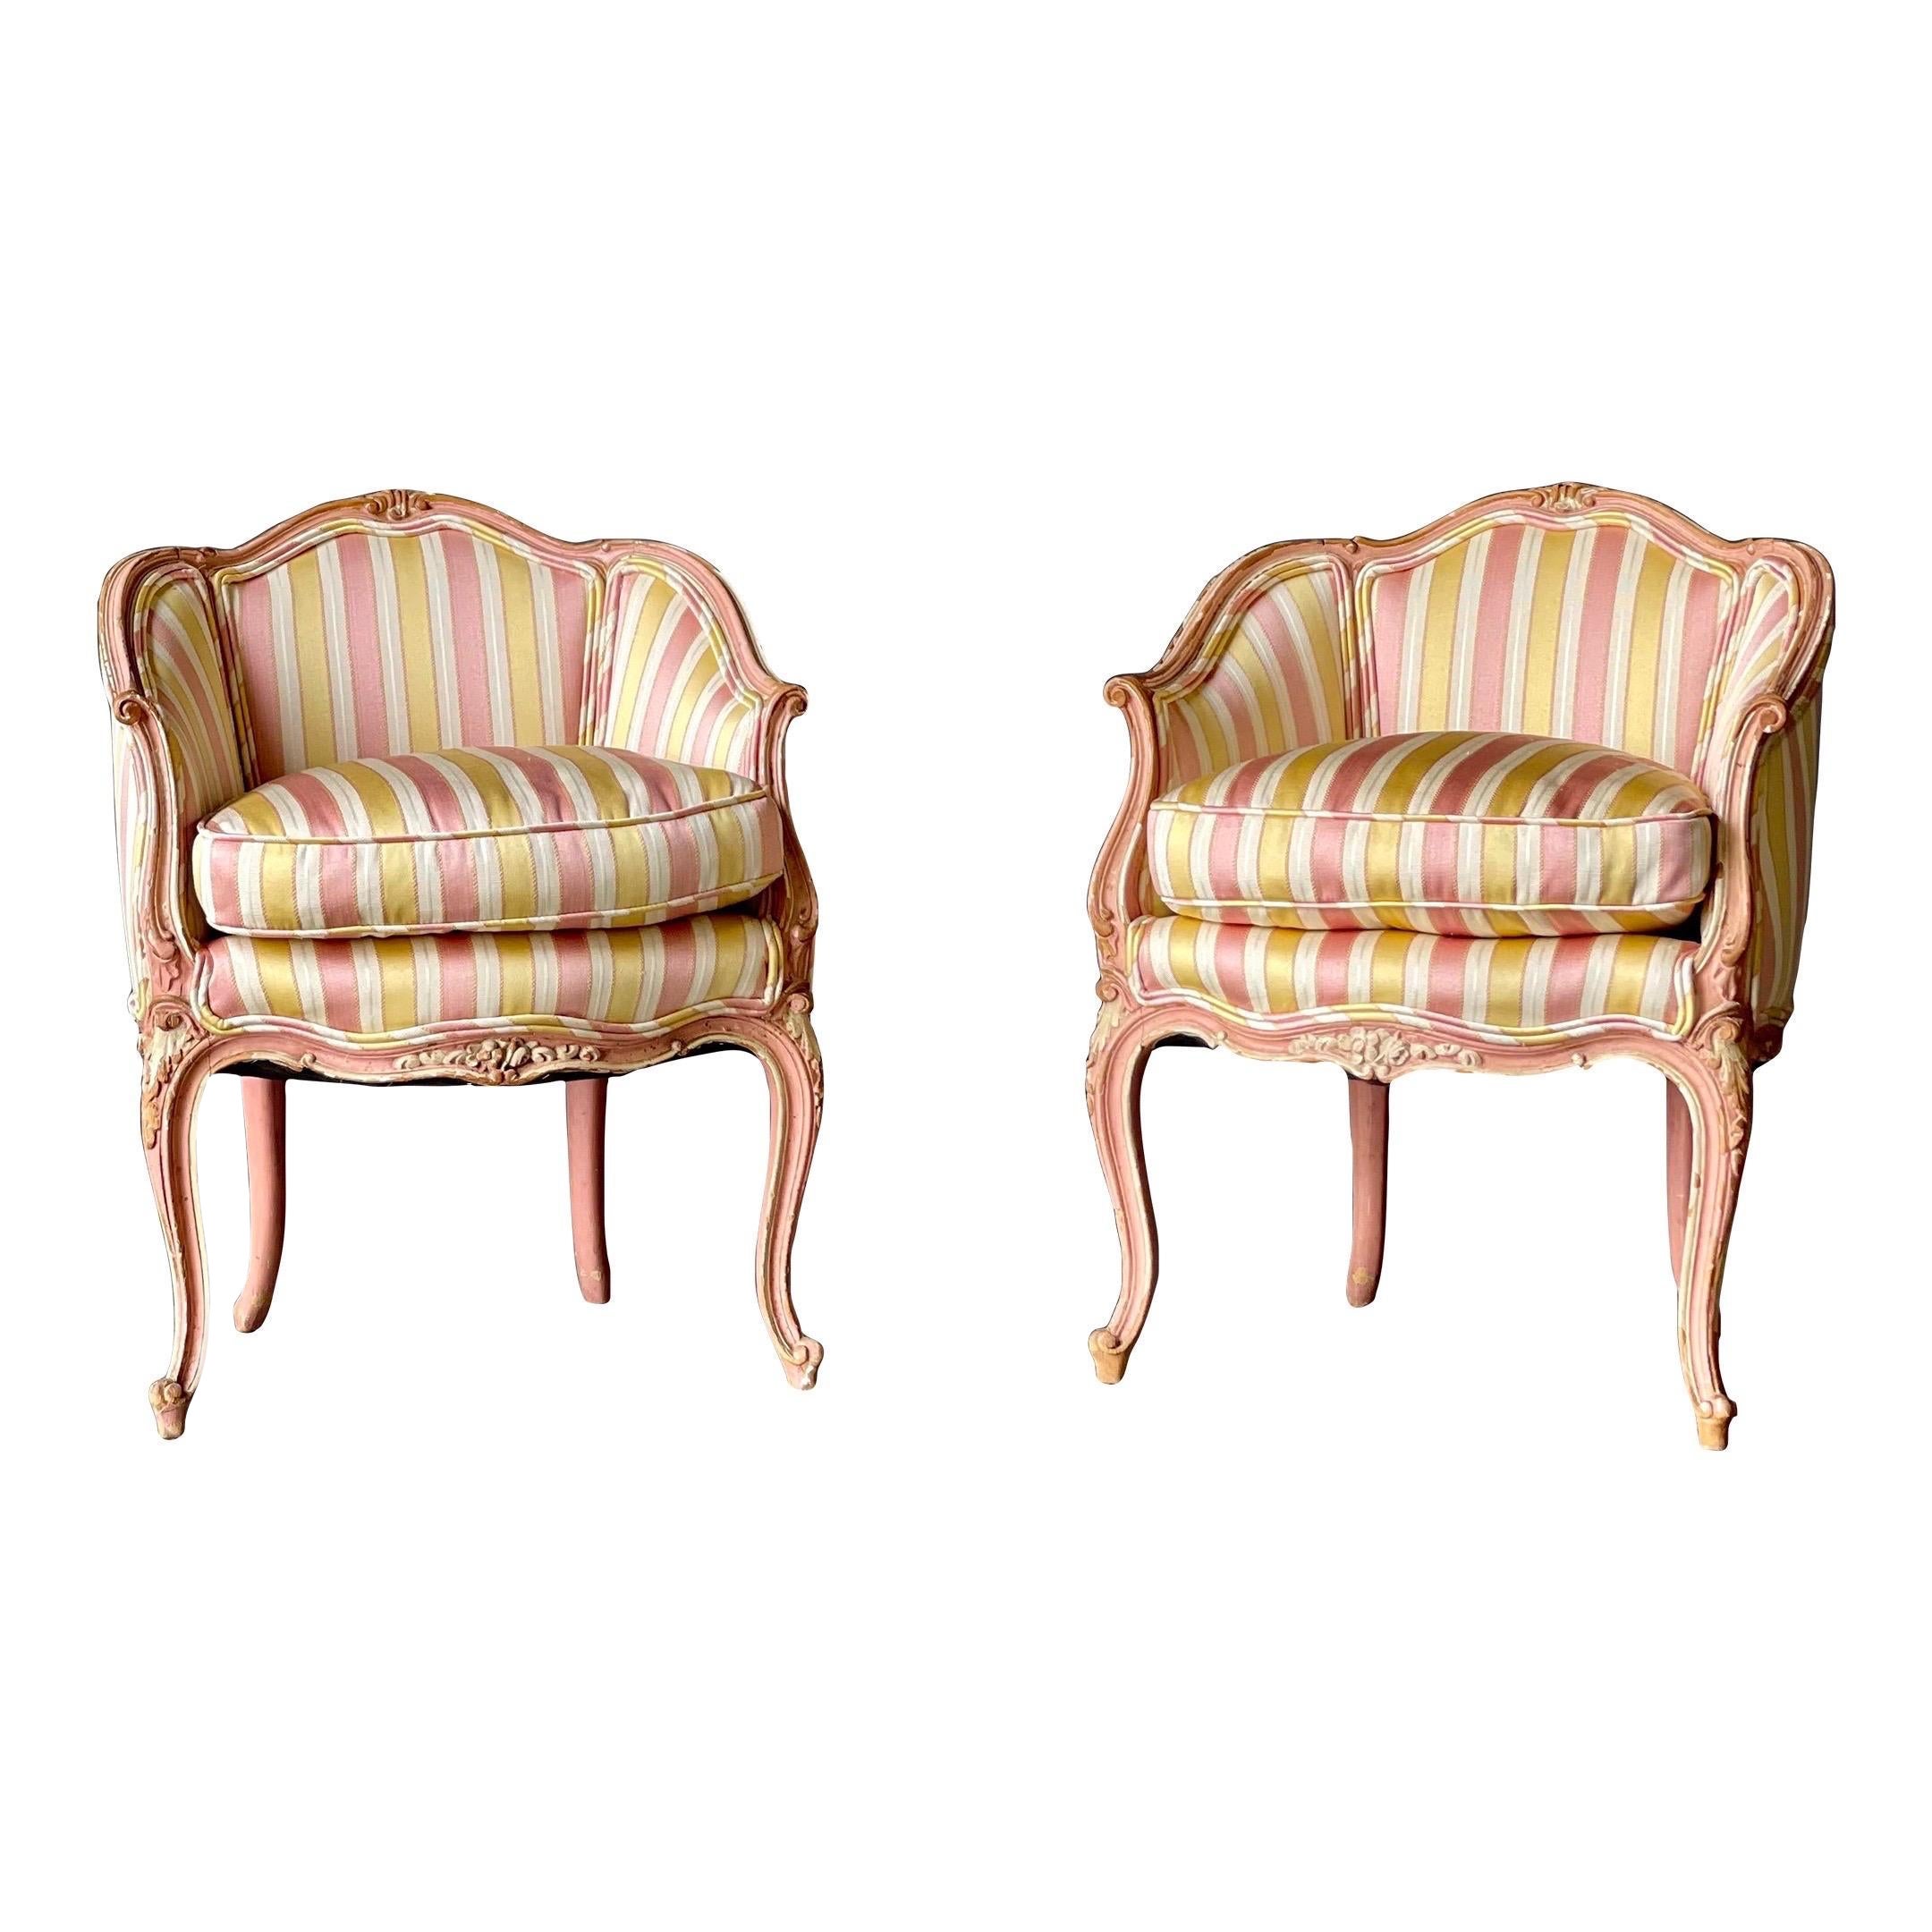 Louis XV Style Bergere Chairs - a Pair For Sale